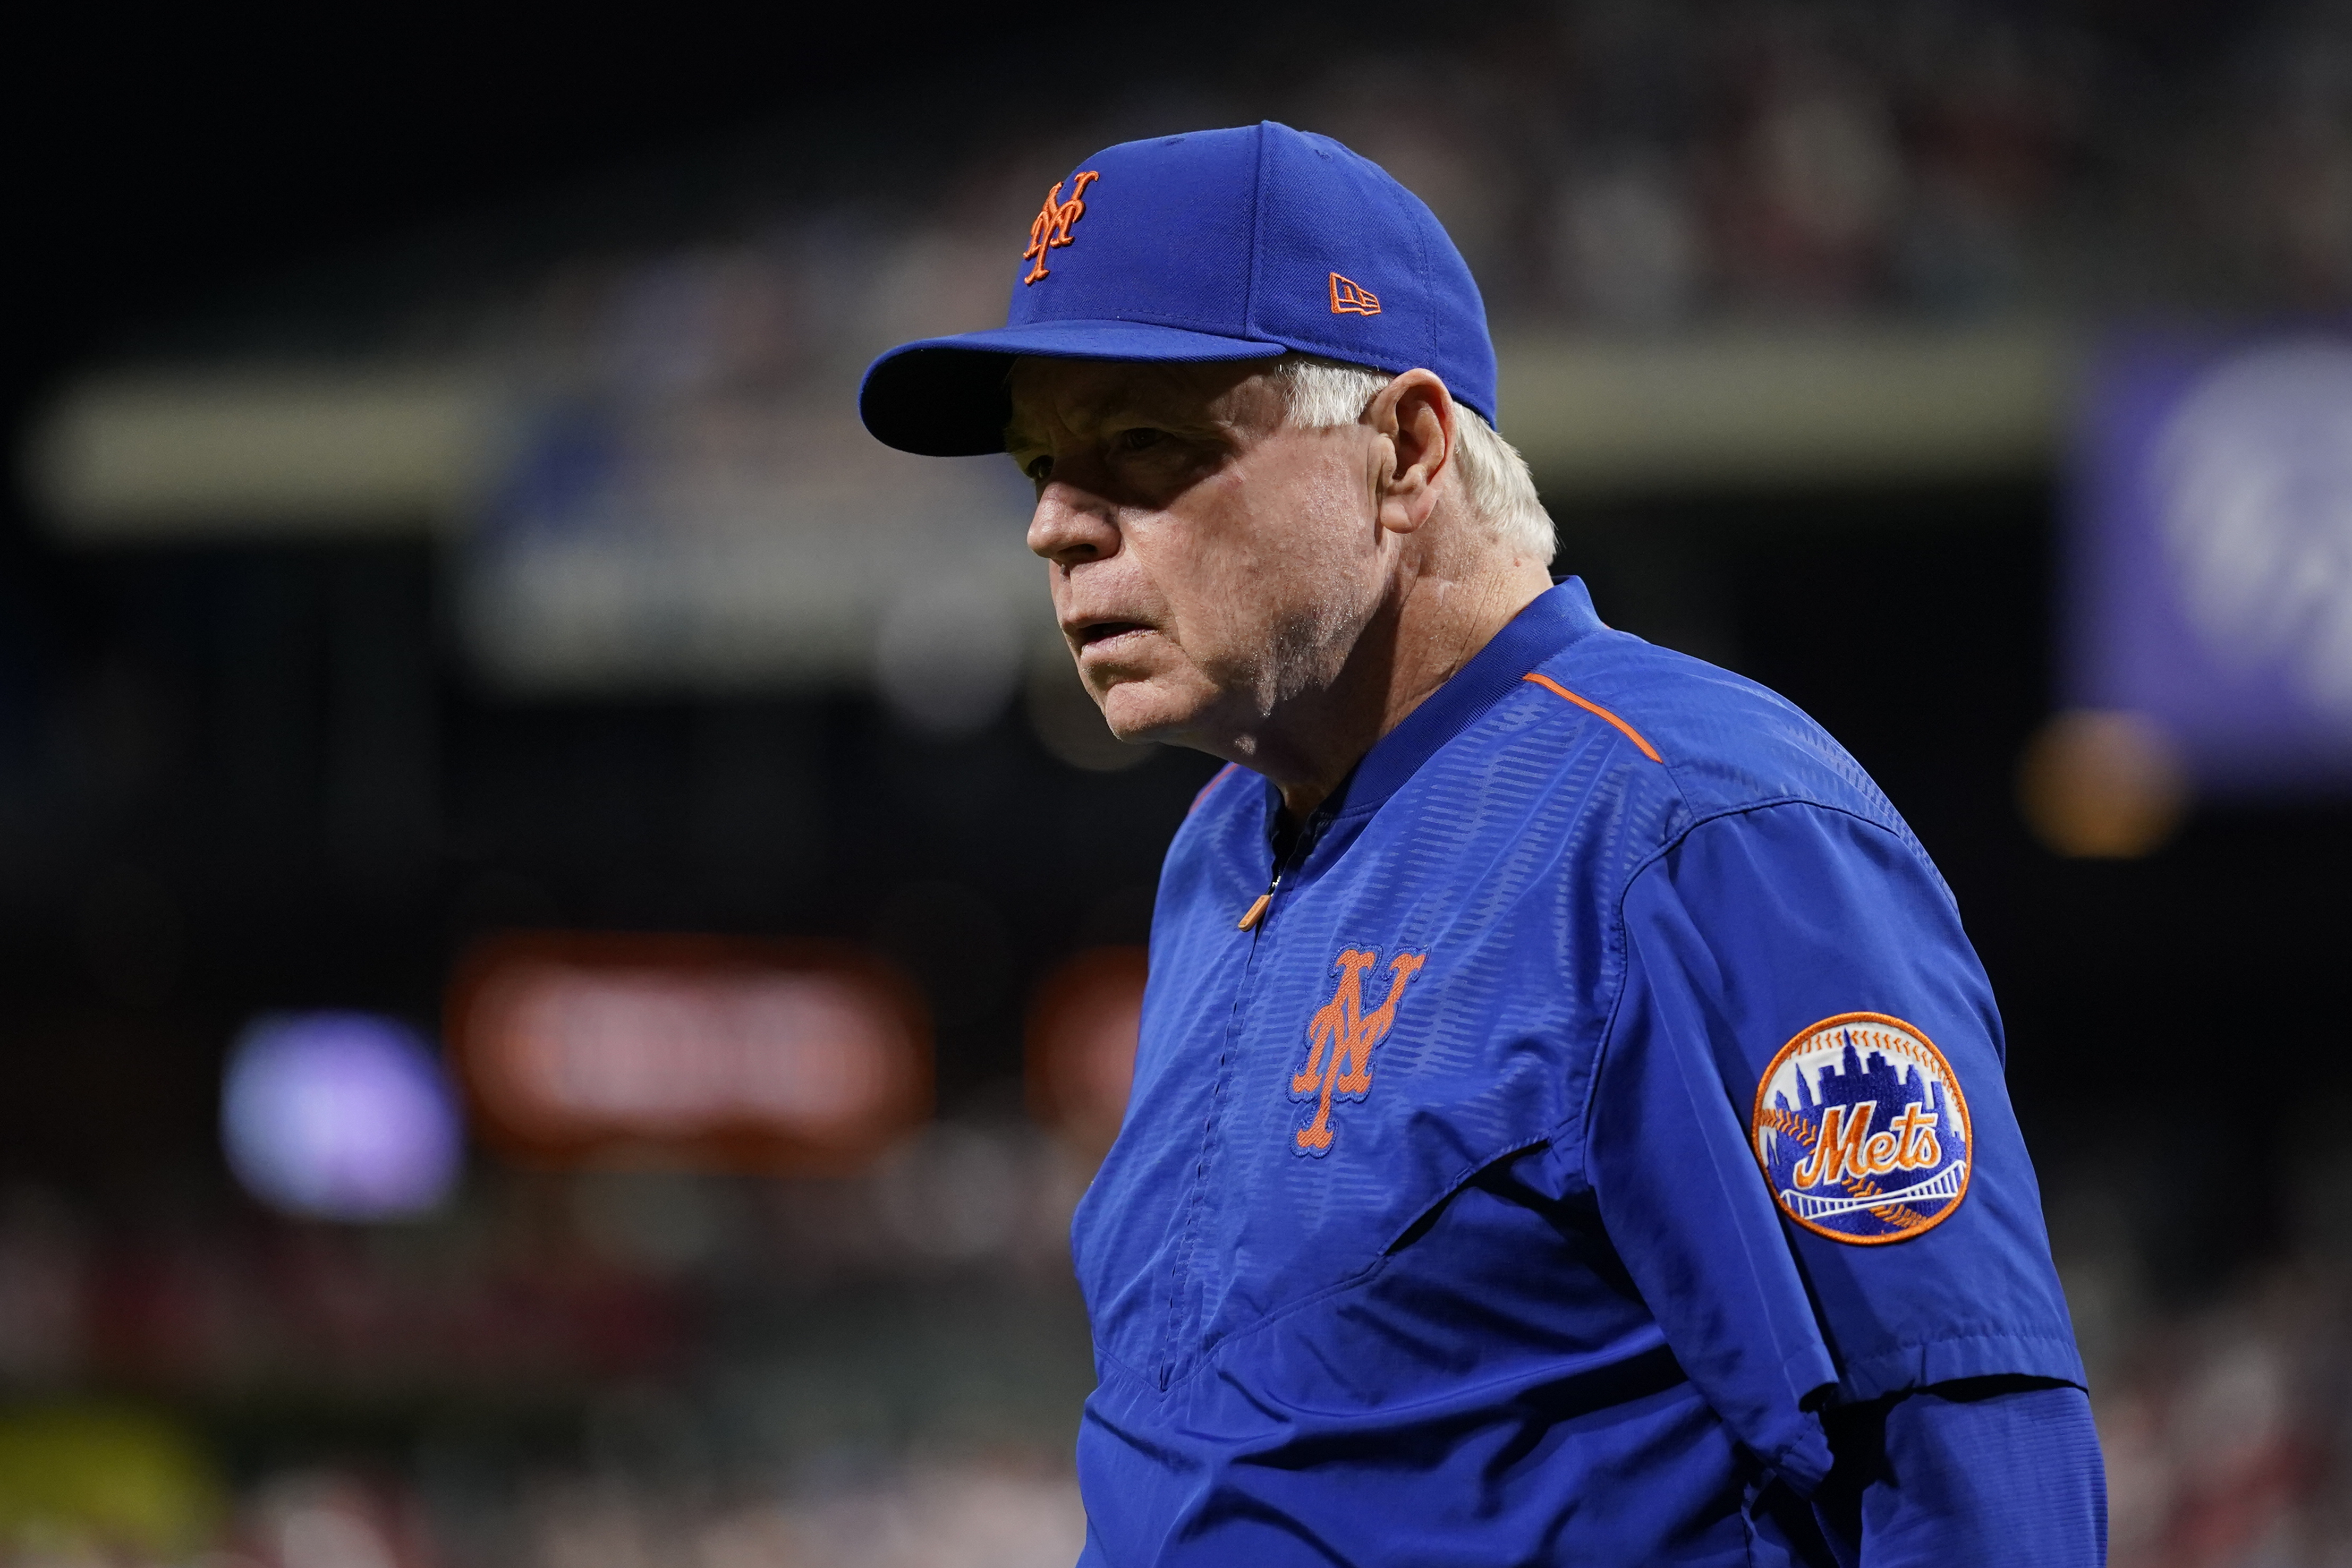 Why the Buck Showalter should stop here for the Mets